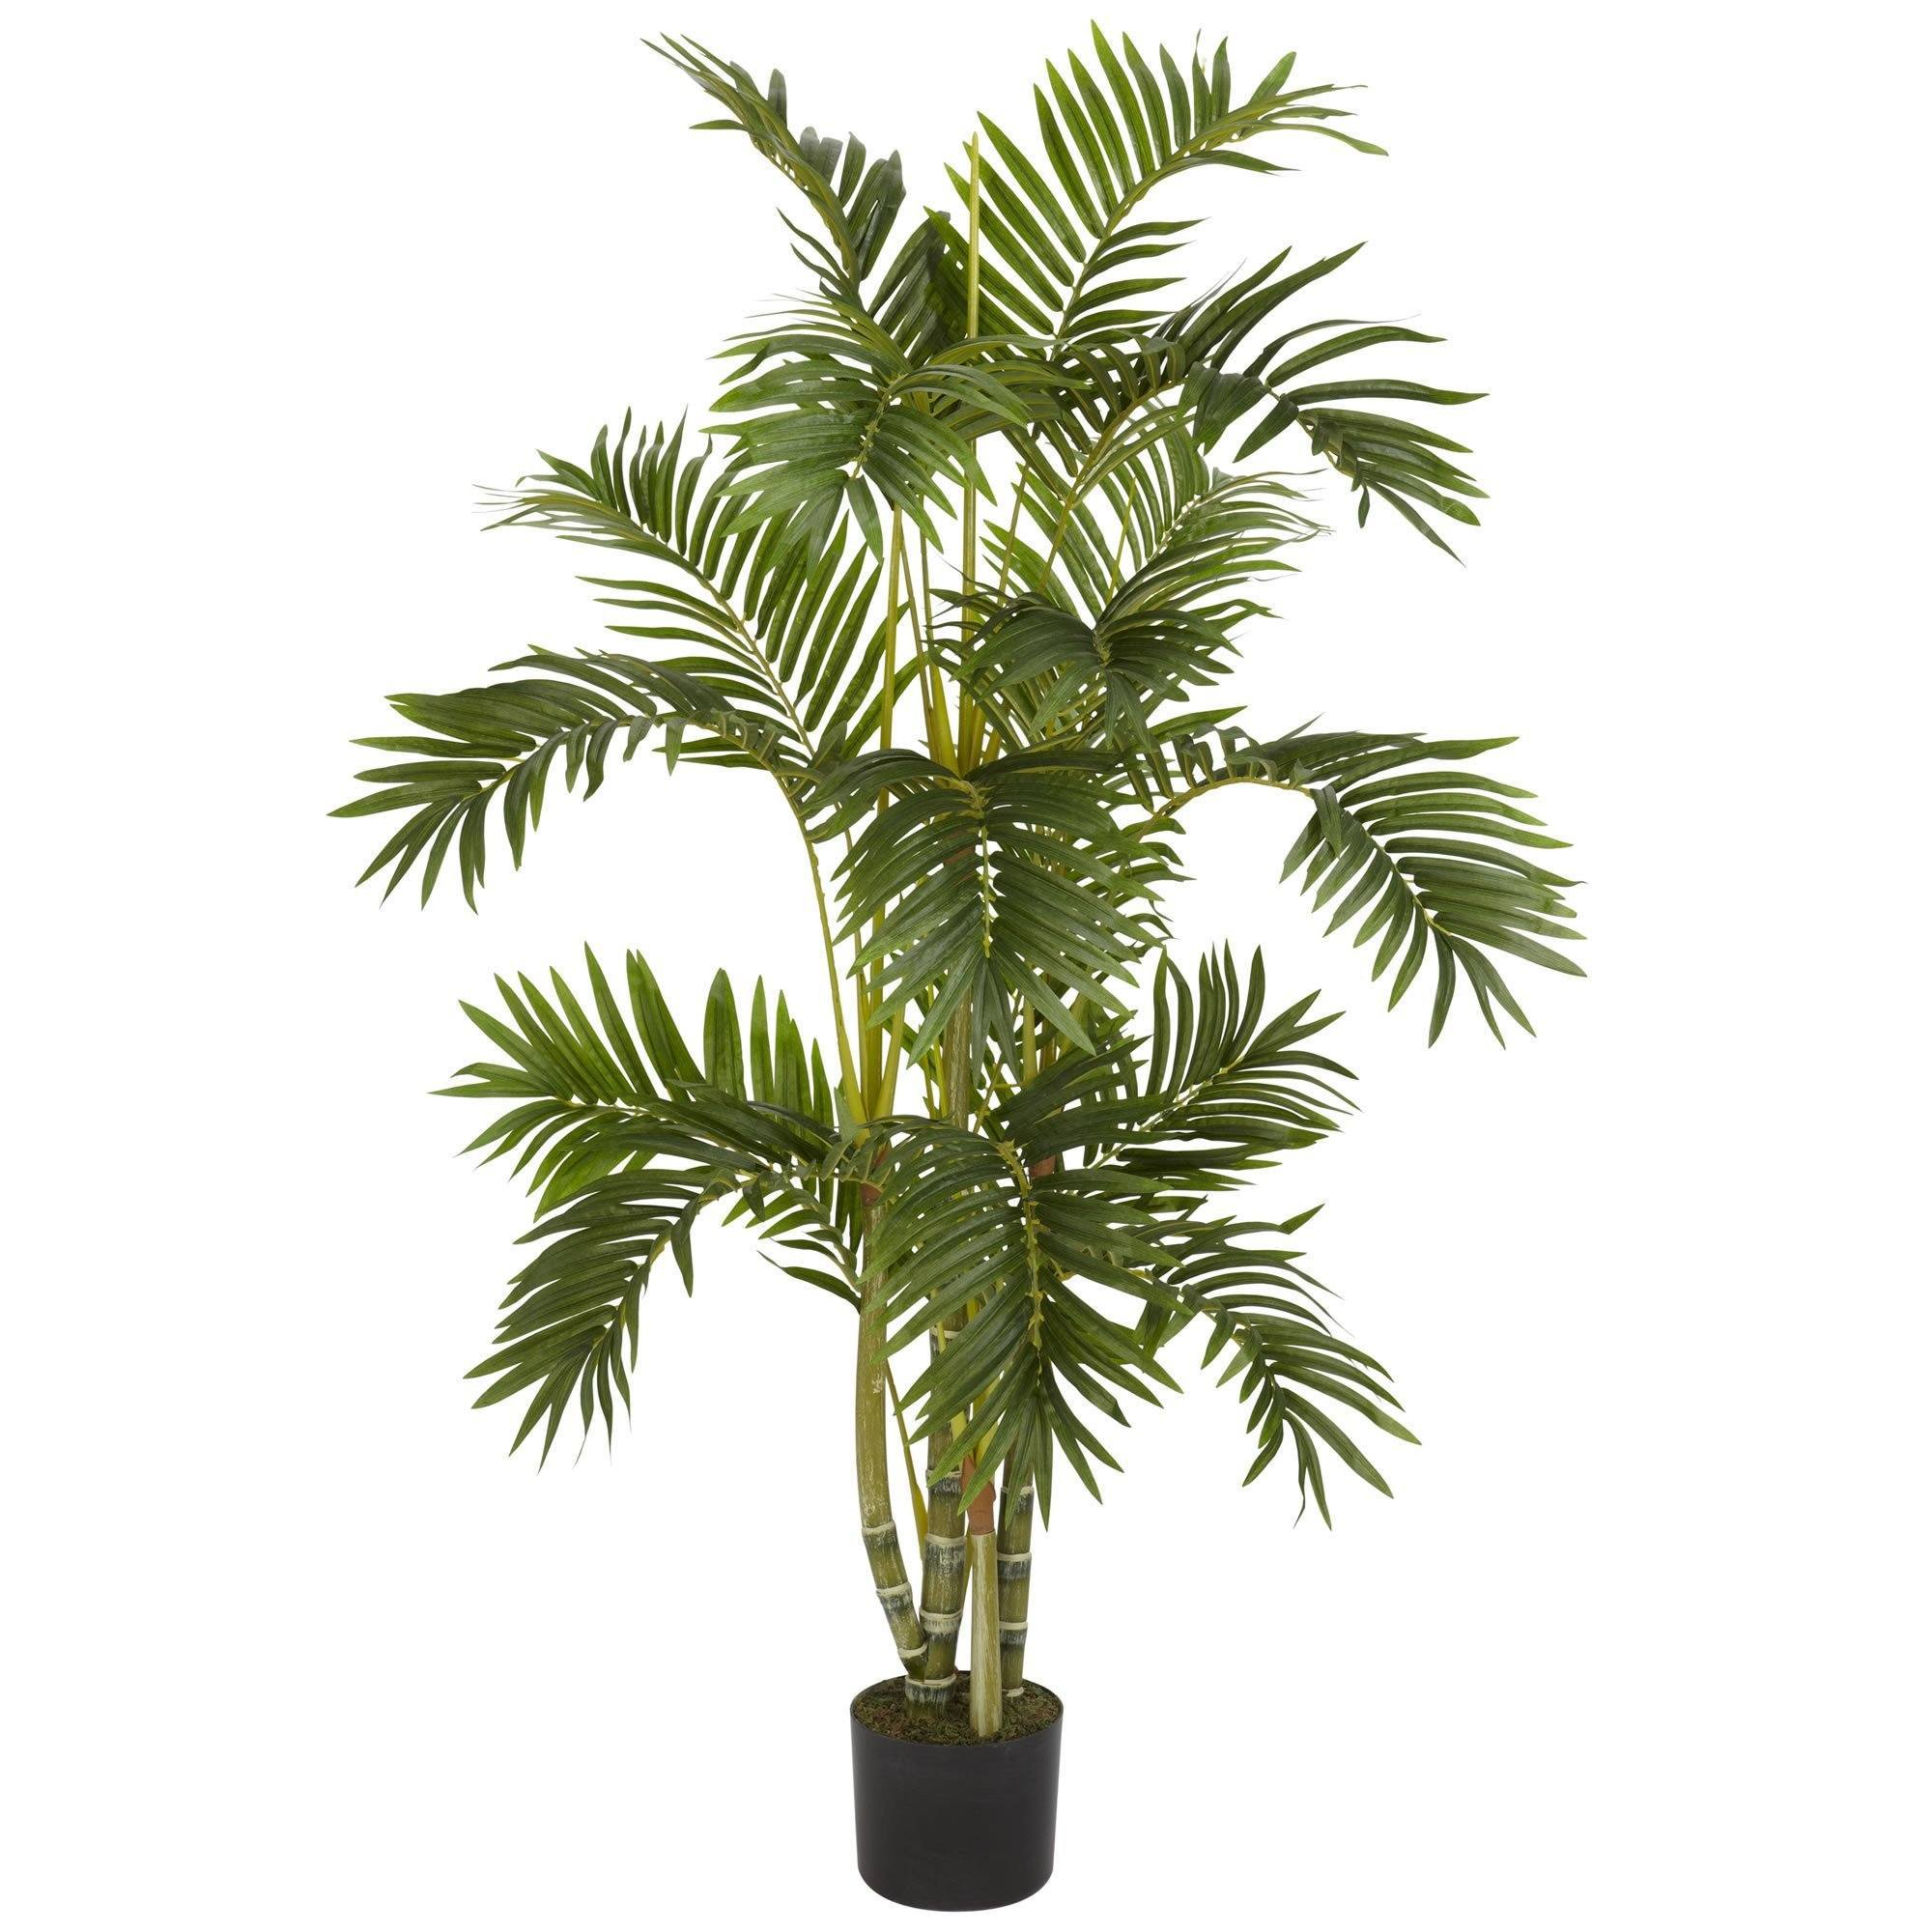 Artificial Tree - 4' Areca Palm Silk Tree by Nearly Natural